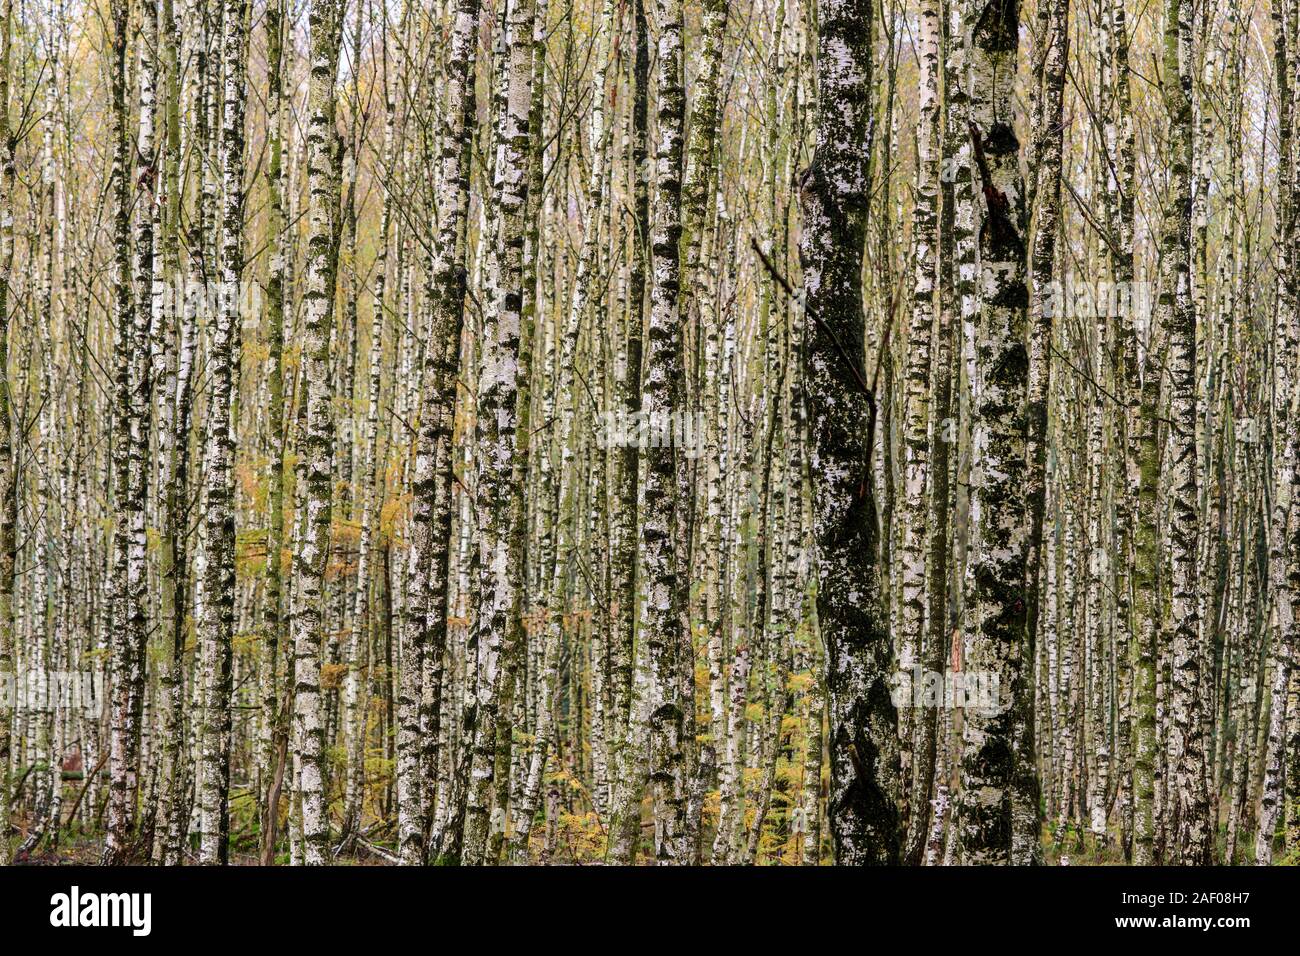 Abstract image of the bark and trunk of birch trees Stock Photo